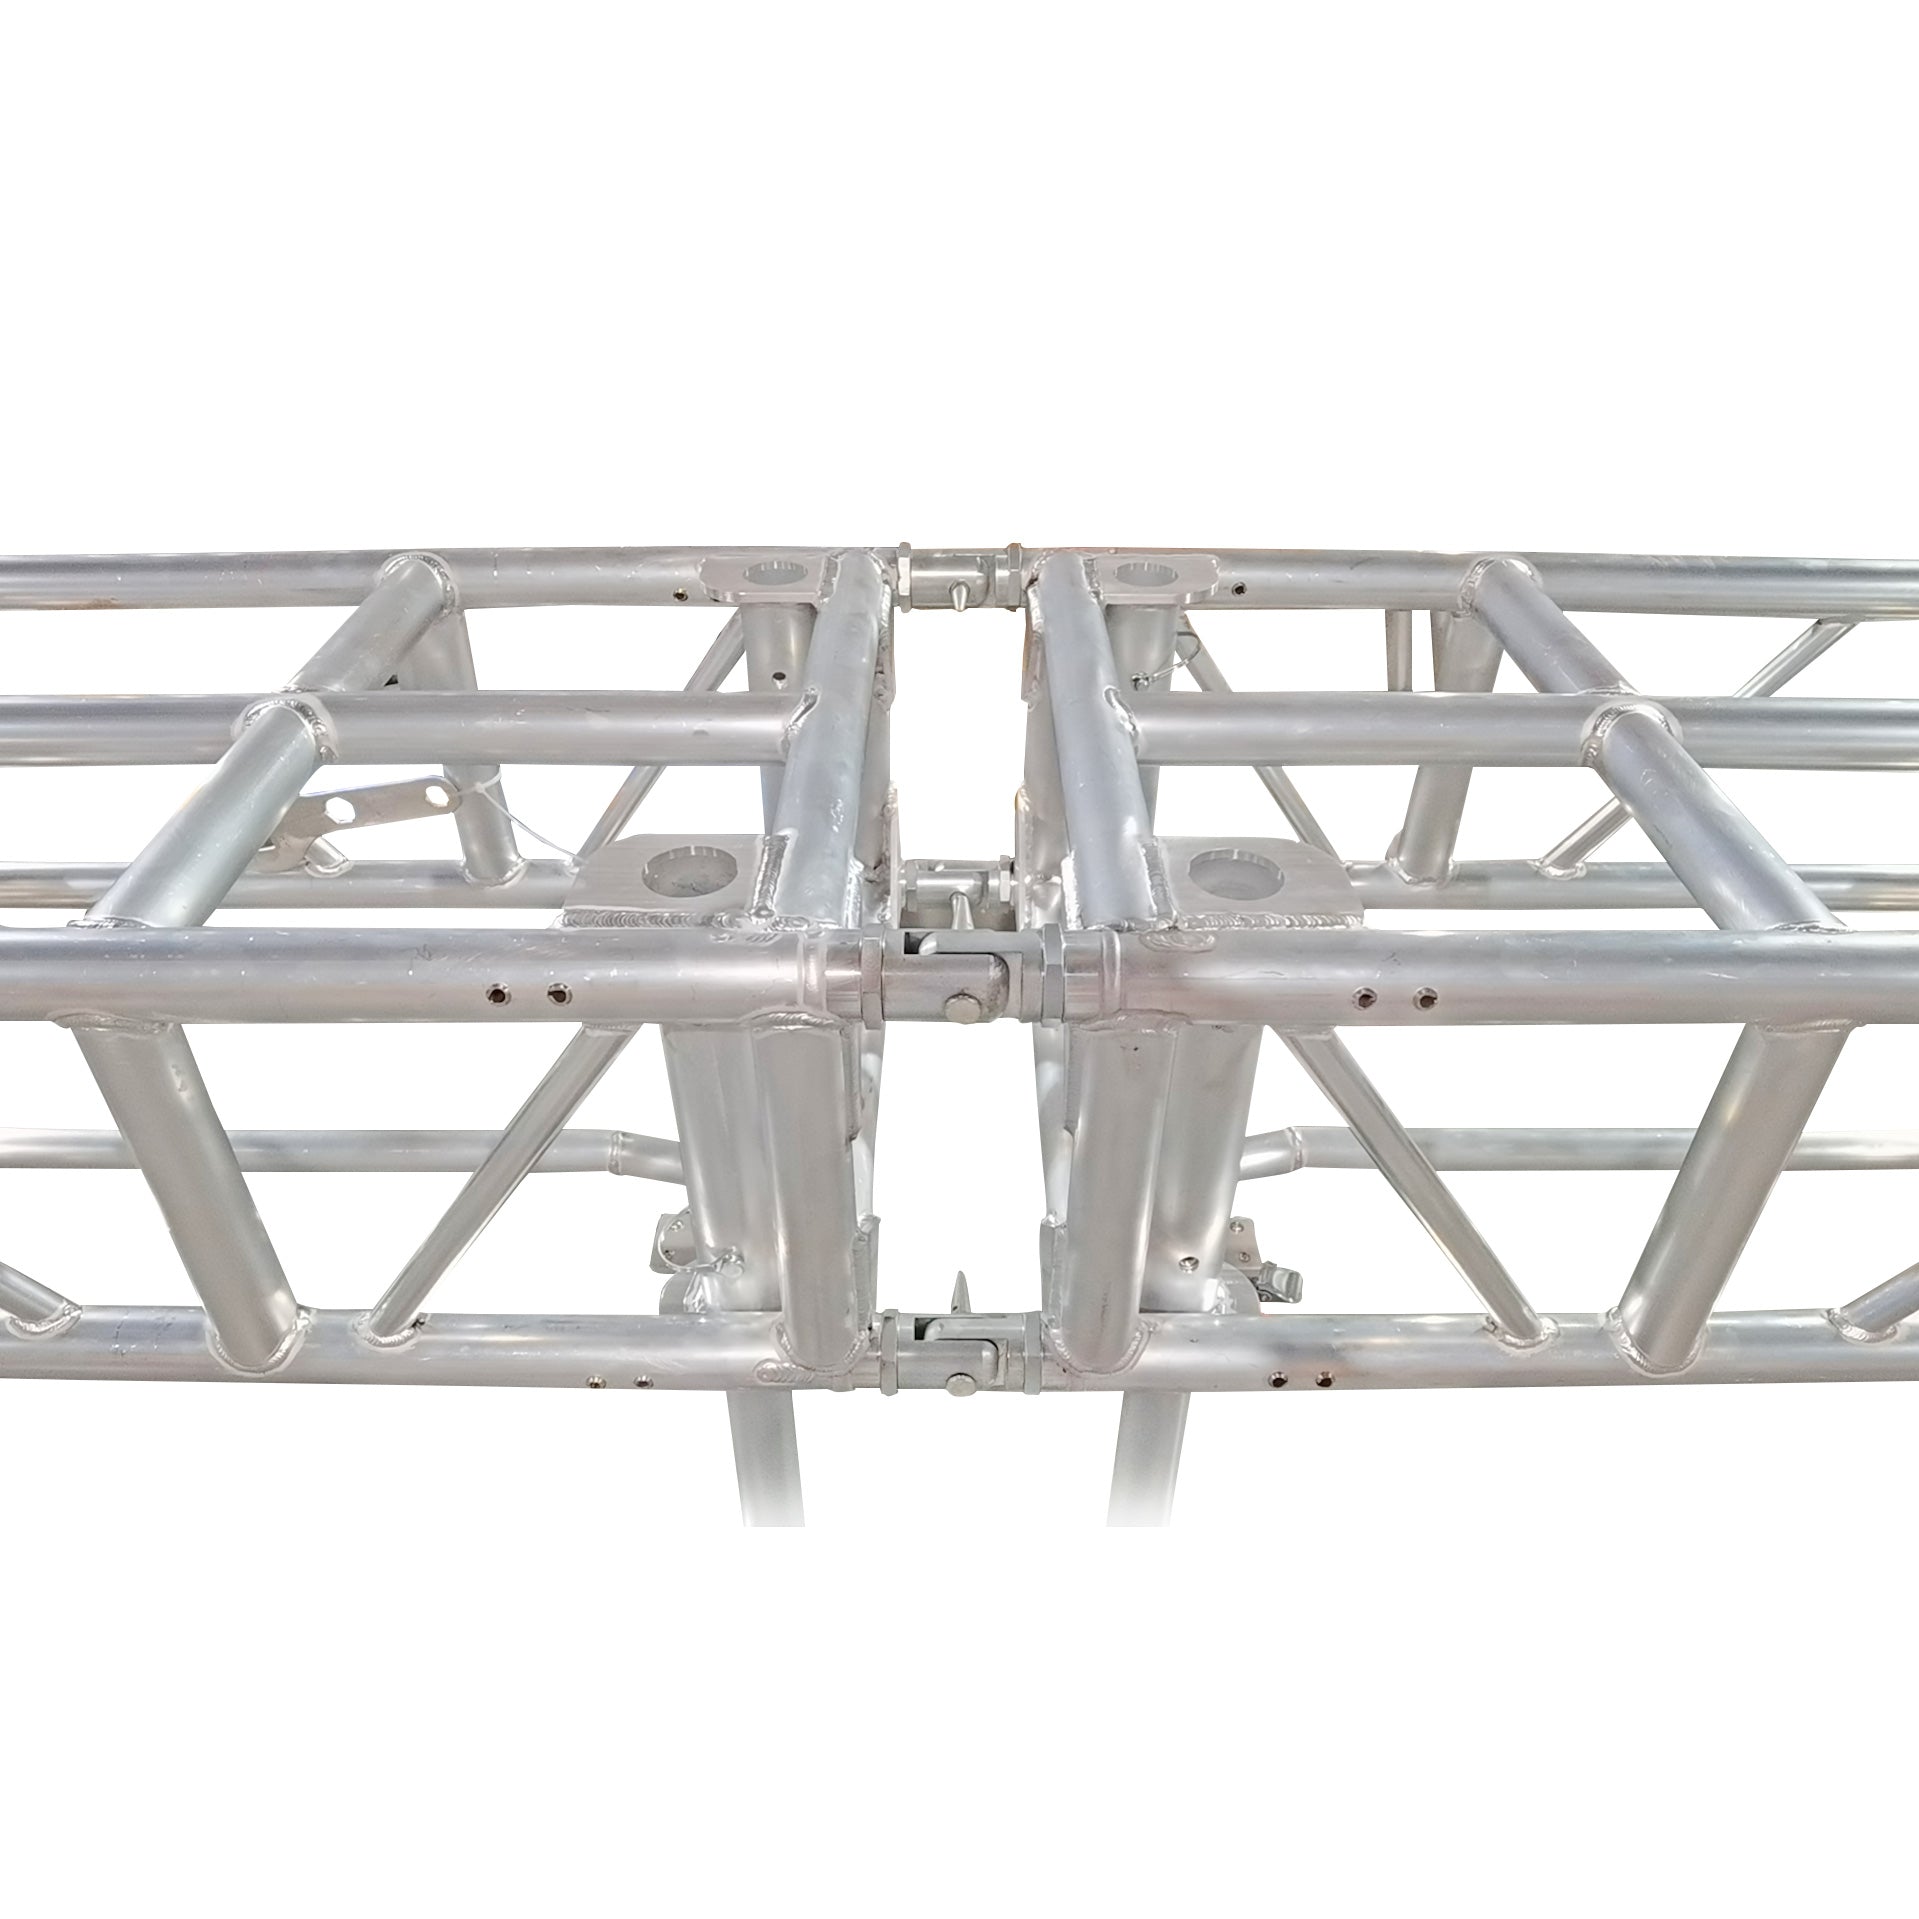 Pro X 8' FT Pre-Rig Rectangular Truss Segment with Removable Rolling Base System XT-PRERIG8FT